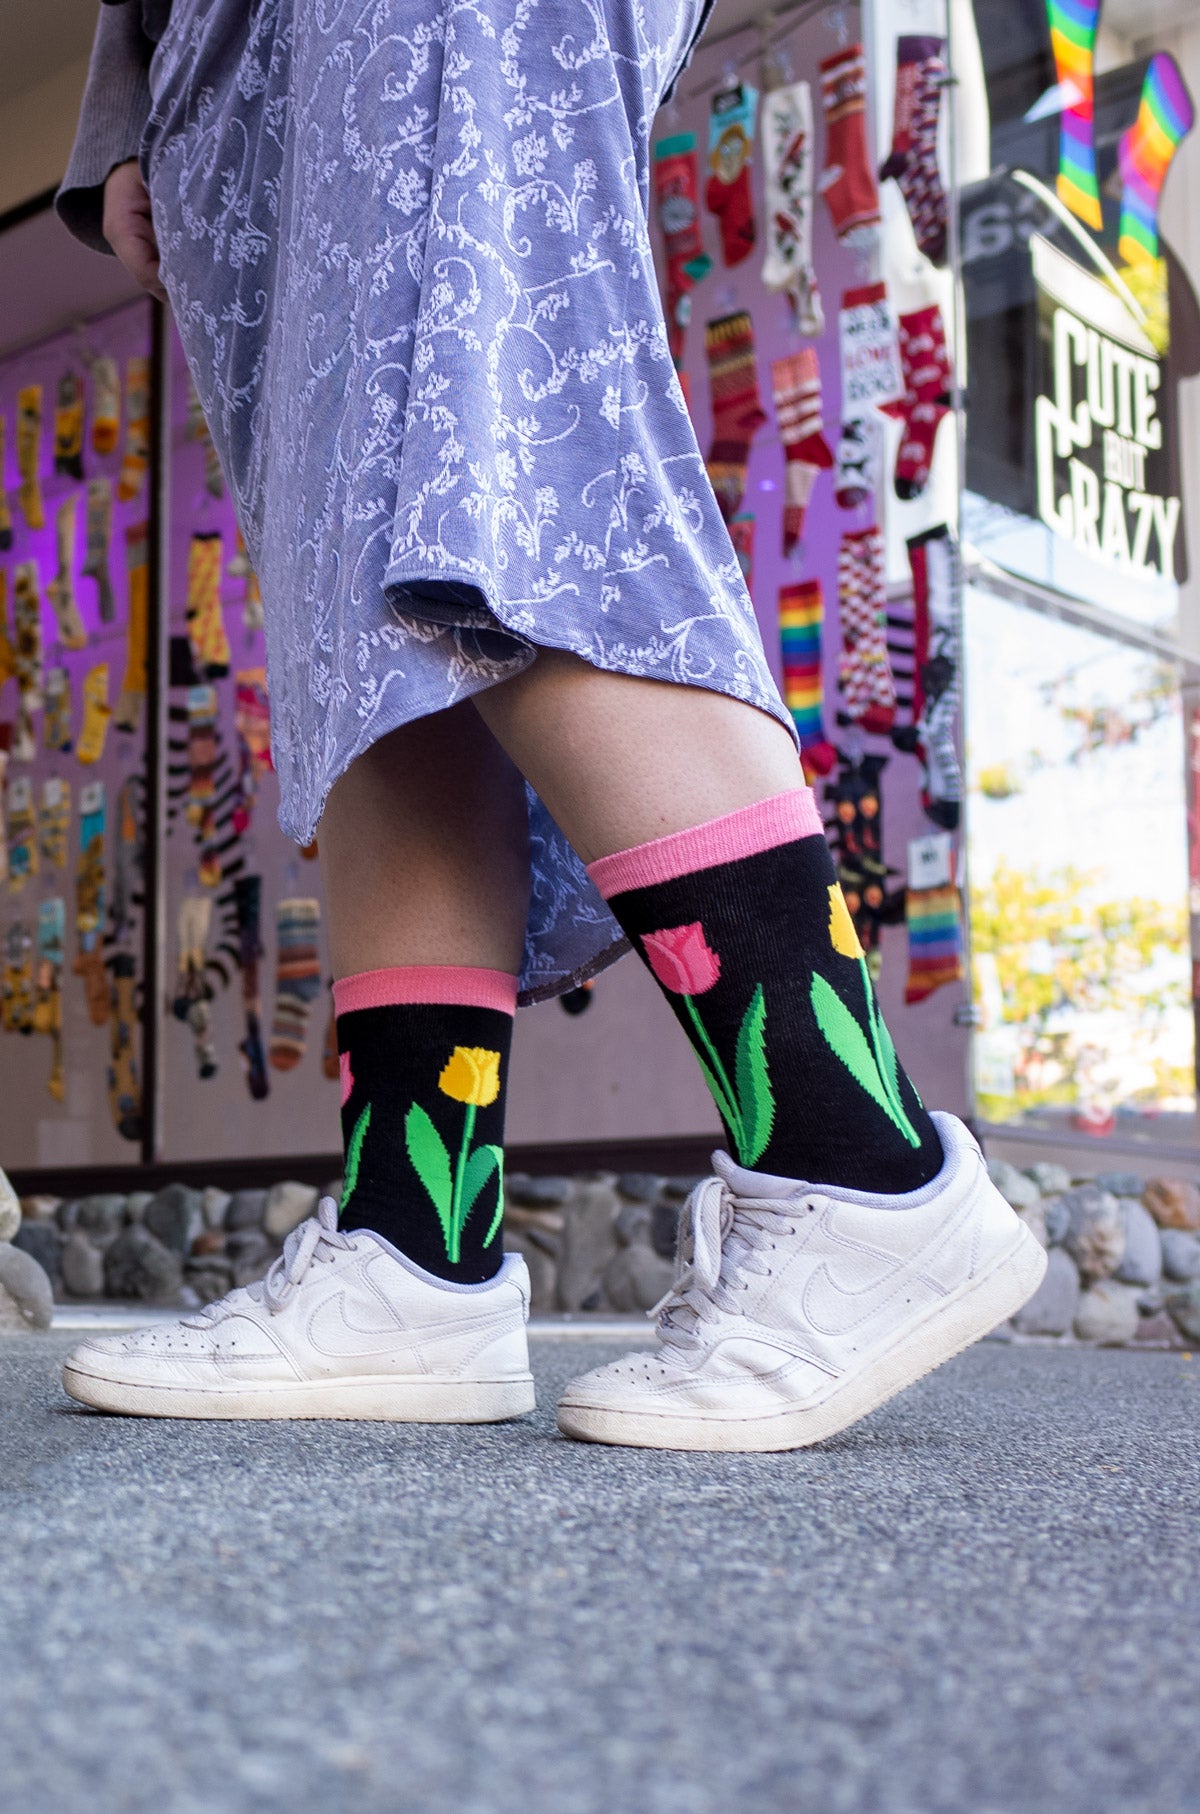 Hailey wears tulip crew socks with a purple skirt and white shoes at the entrance to Cute But Crazy Socks in Bellingham, Washington